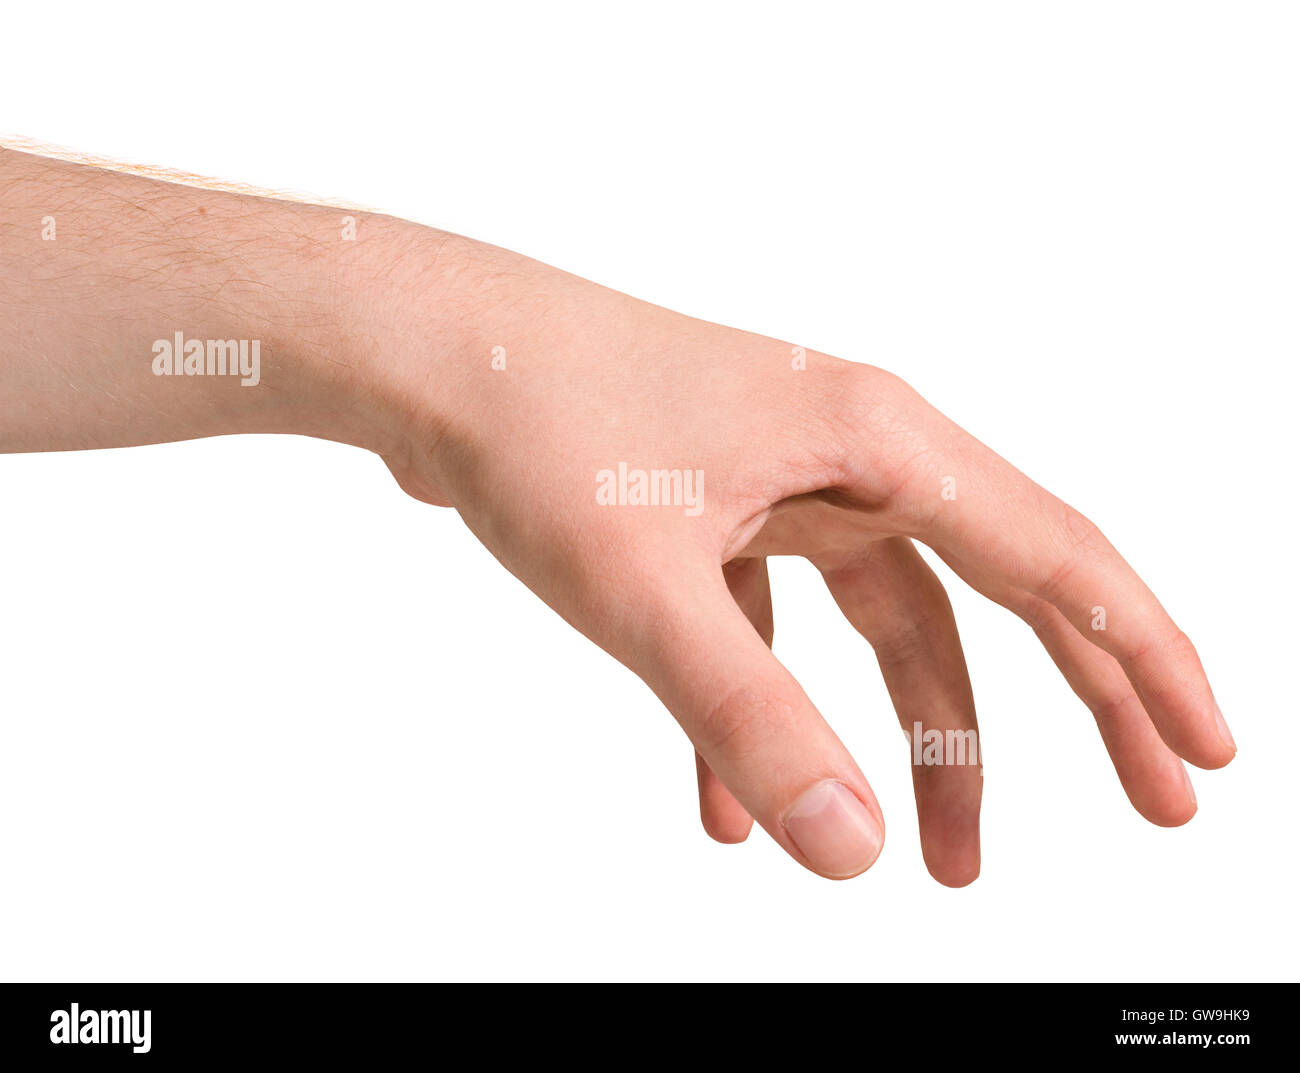 Isolated Male Hand in a Position Stock Photo